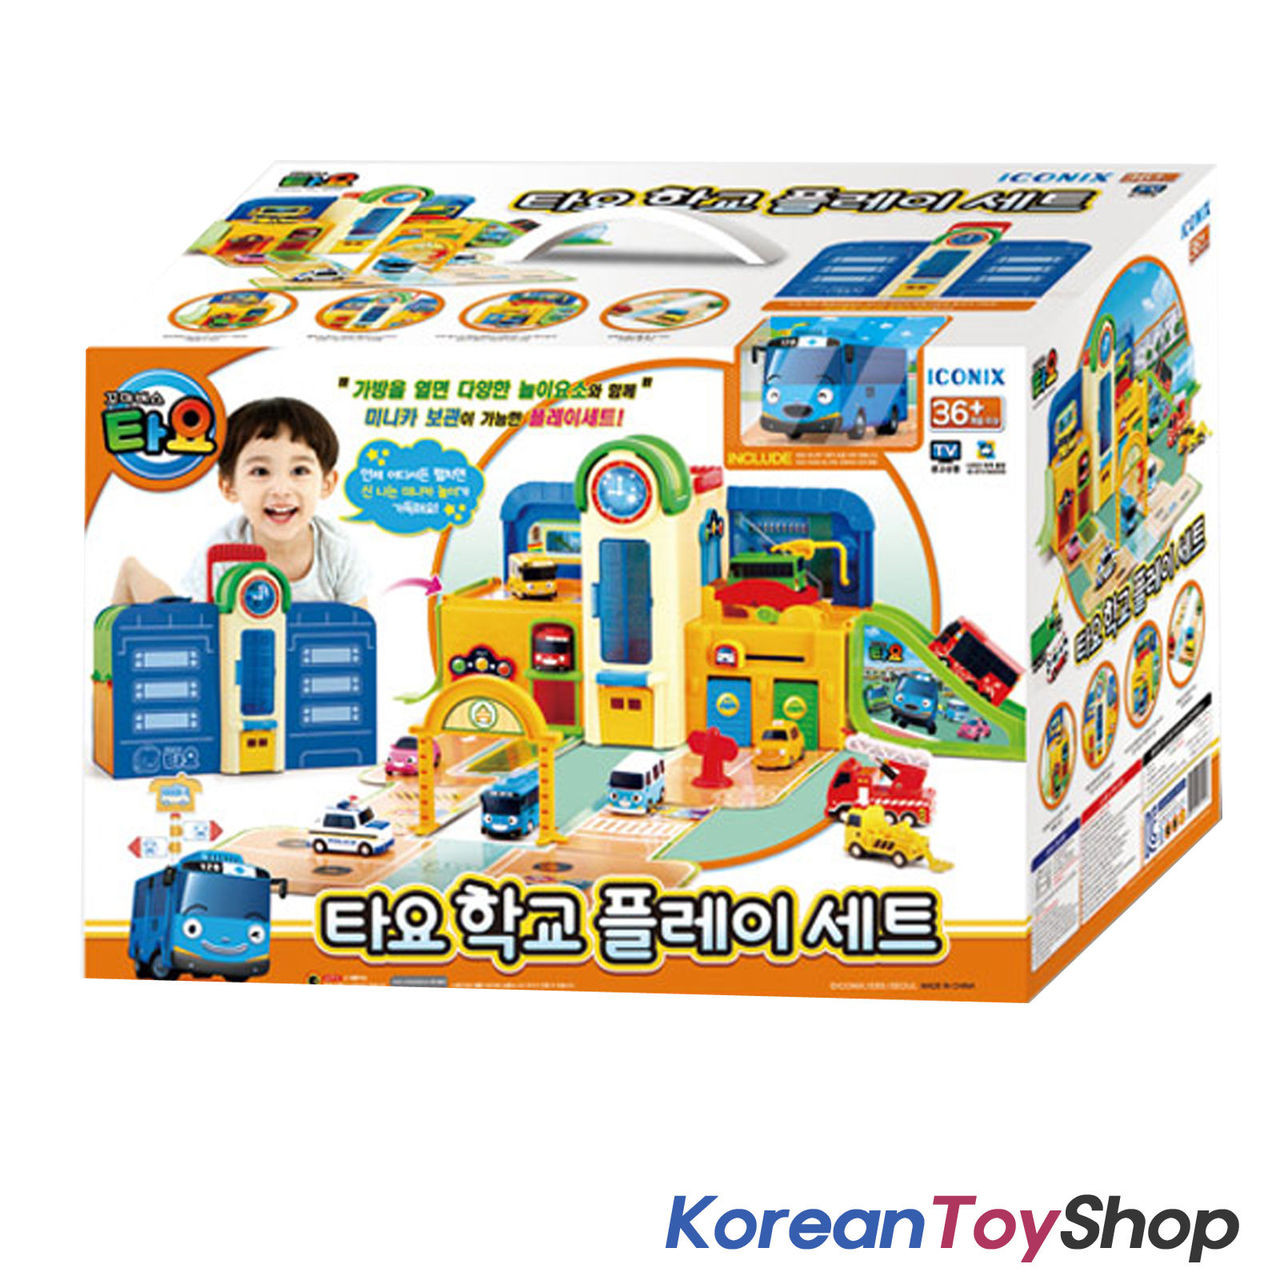 The Little Bus TAYO "Track play set" Toy Mini car/Korean TV animation character 